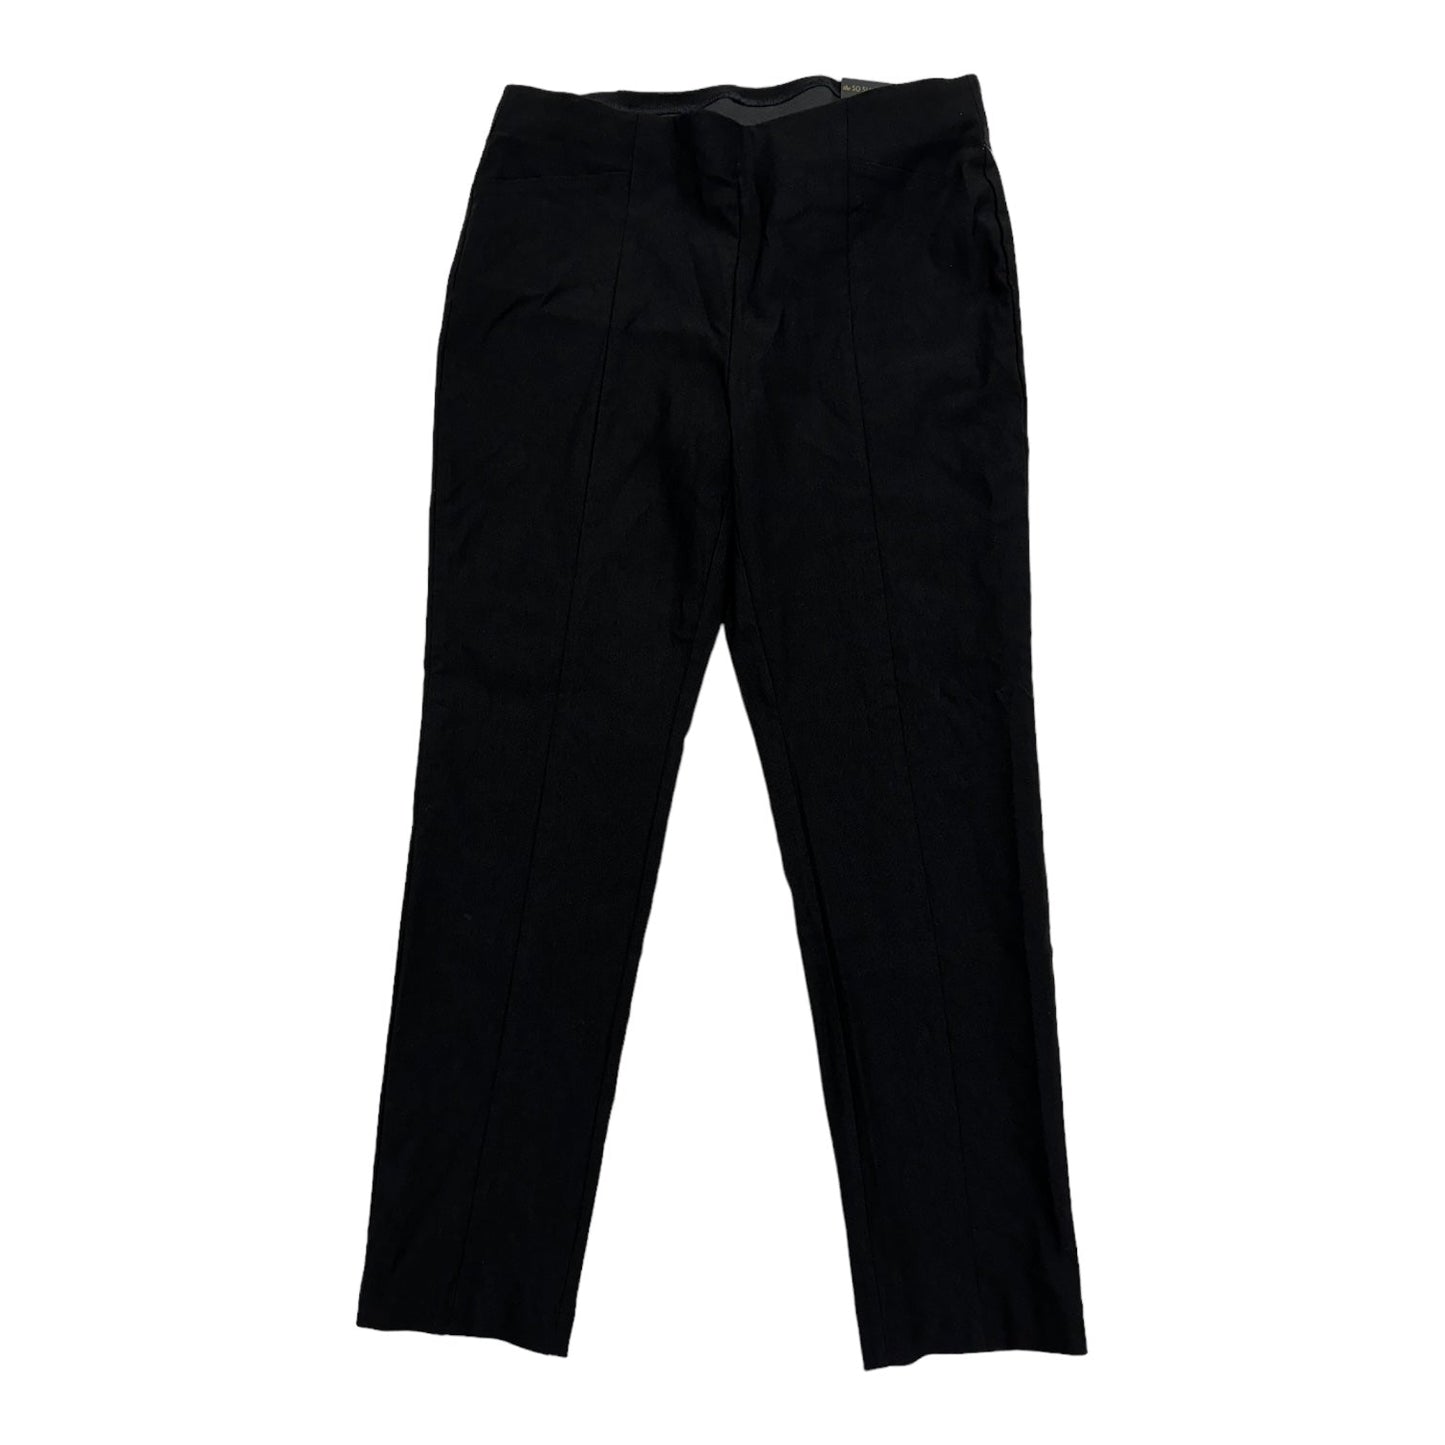 Black Pants Other Chicos, Size 12